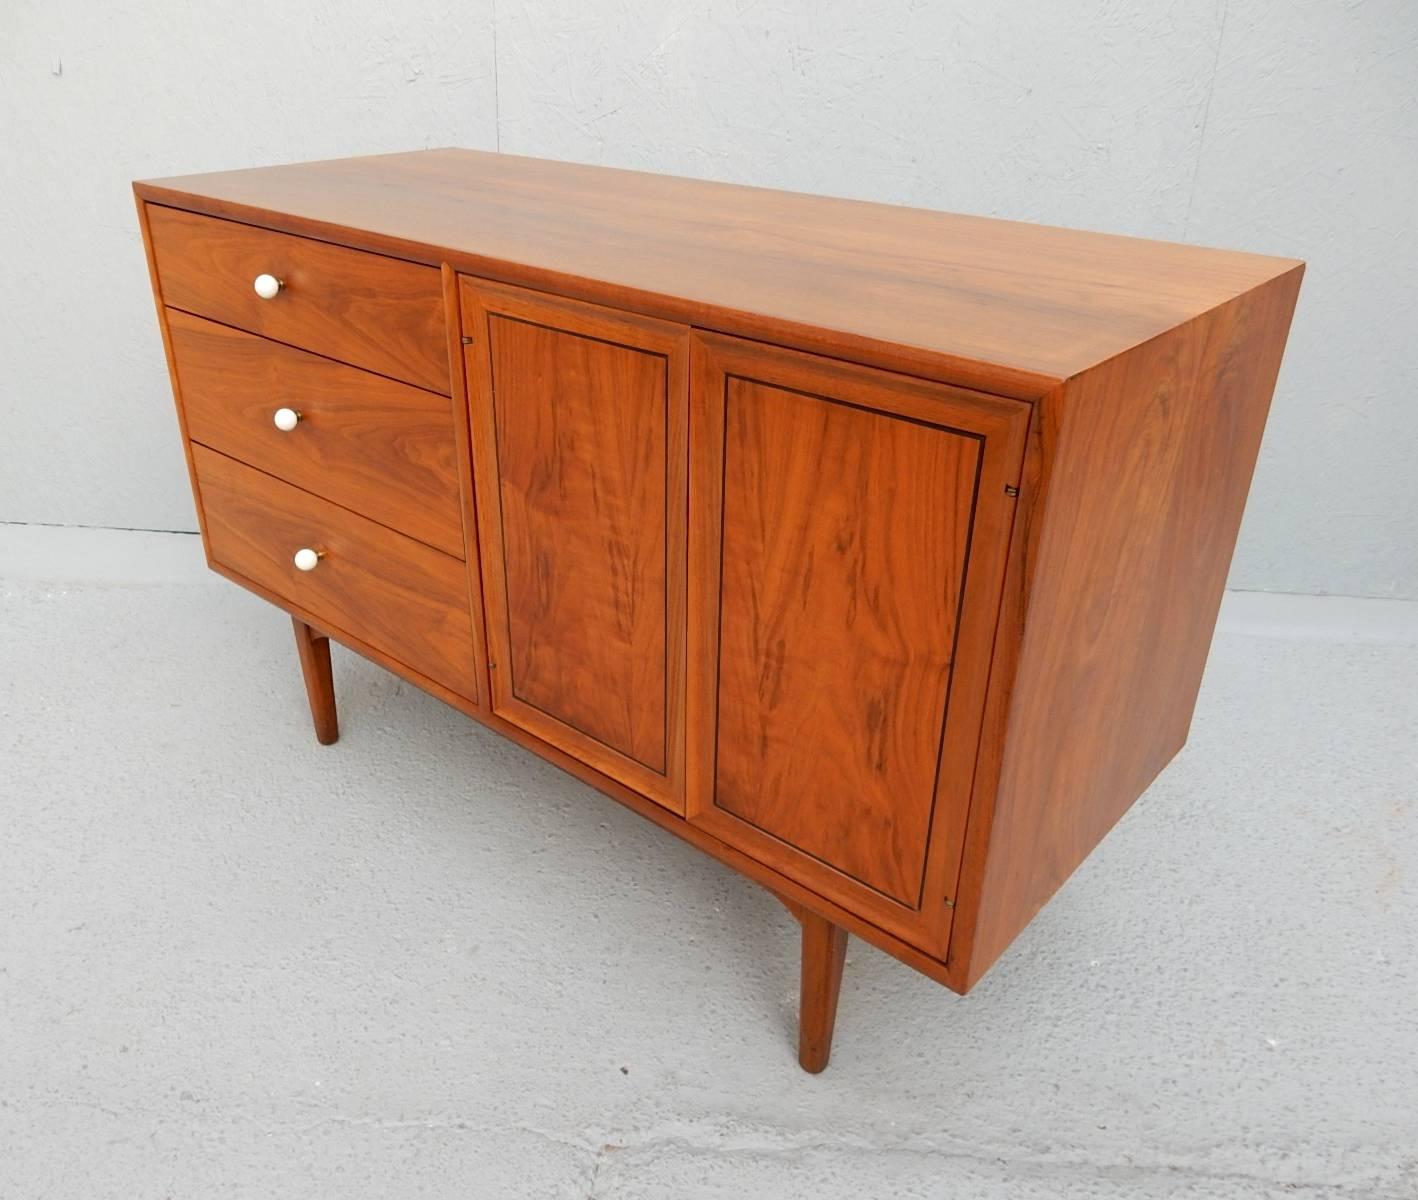 Near perfect example of an exceptional Kipp Stewart designed small buffet cabinet by Drexel. Three drawers, two cabinet doors open to double shelf with small interior light.